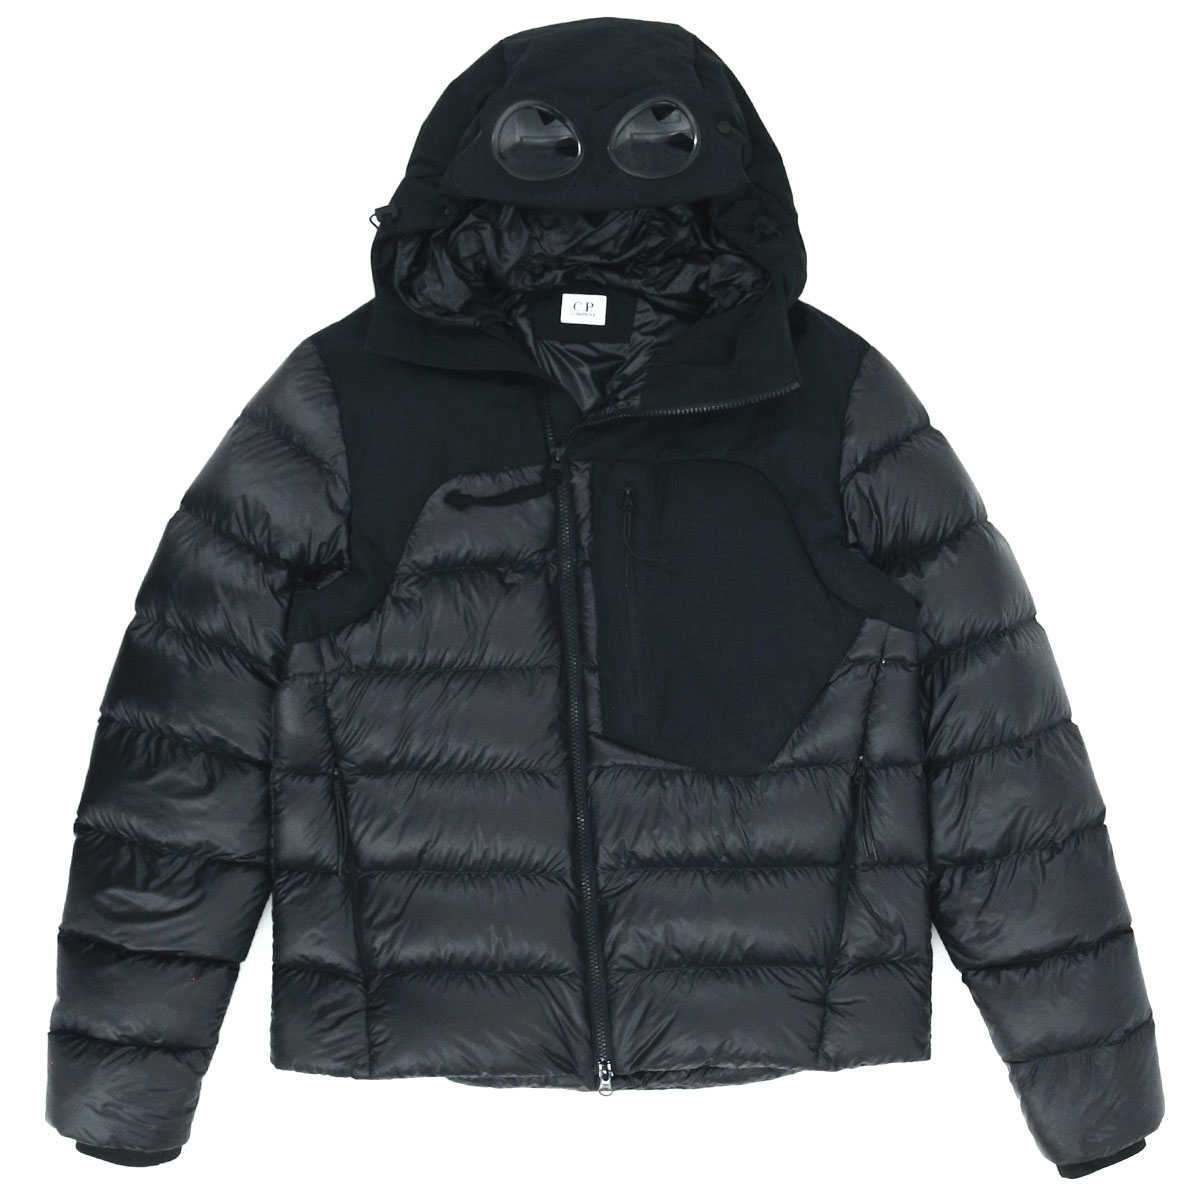 C.P. COMPANY シーピーカンパニー 17AW D.D. SHELL GOGGLE DOWN JACKET 